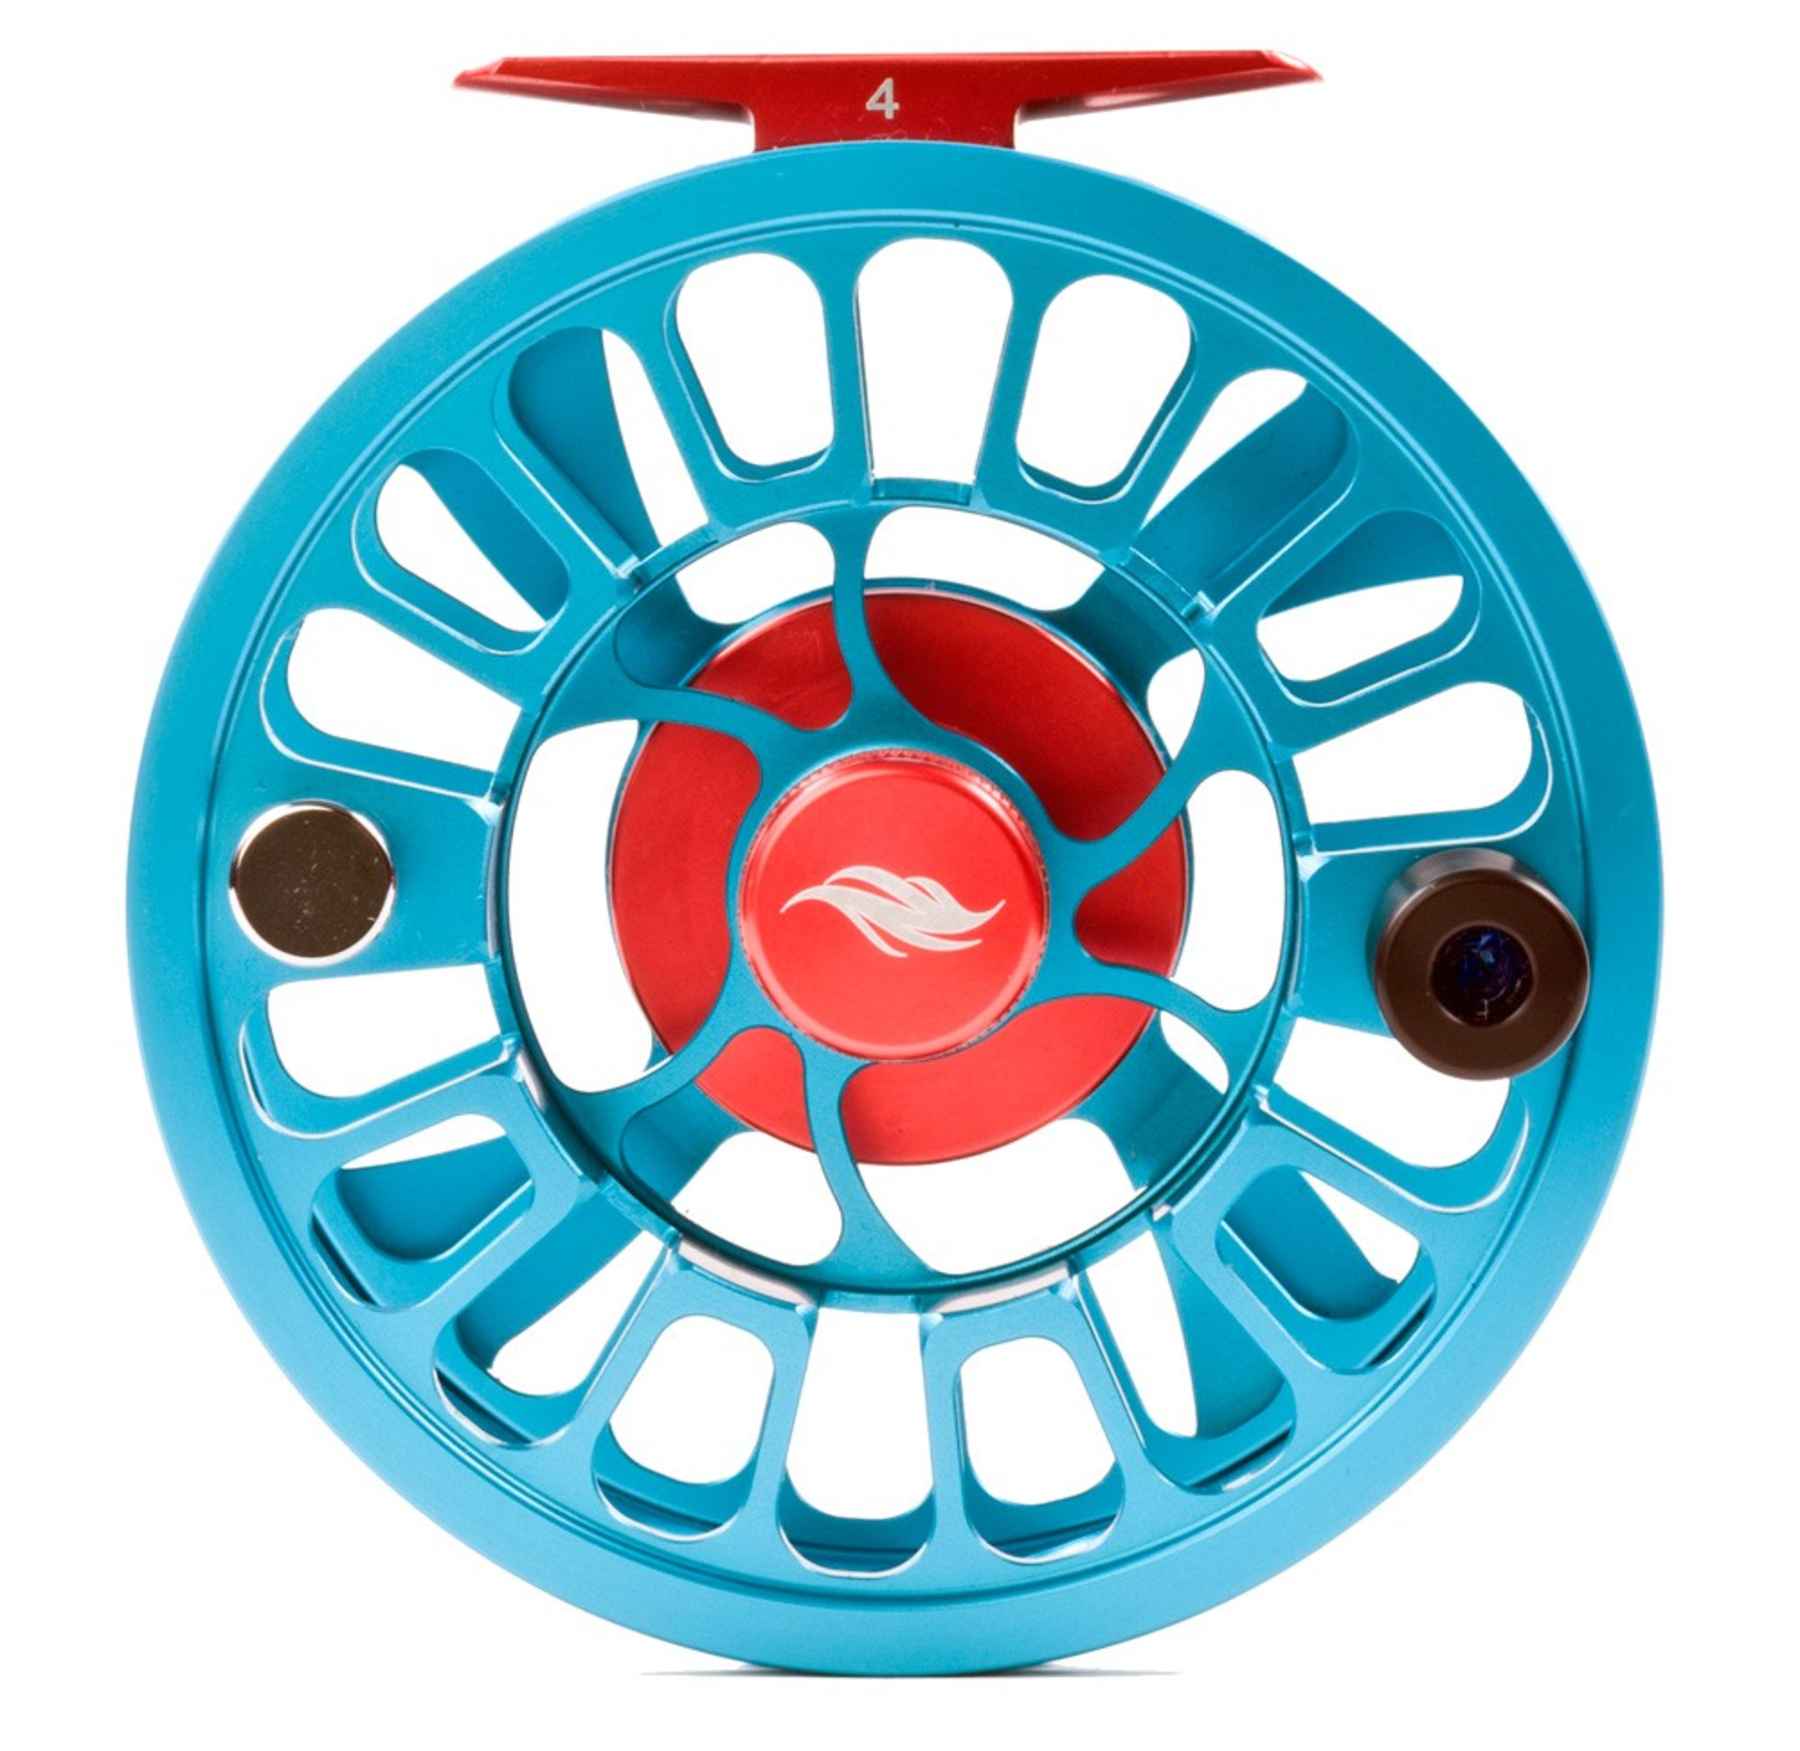 alpha fishing reel, alpha fishing reel Suppliers and Manufacturers at